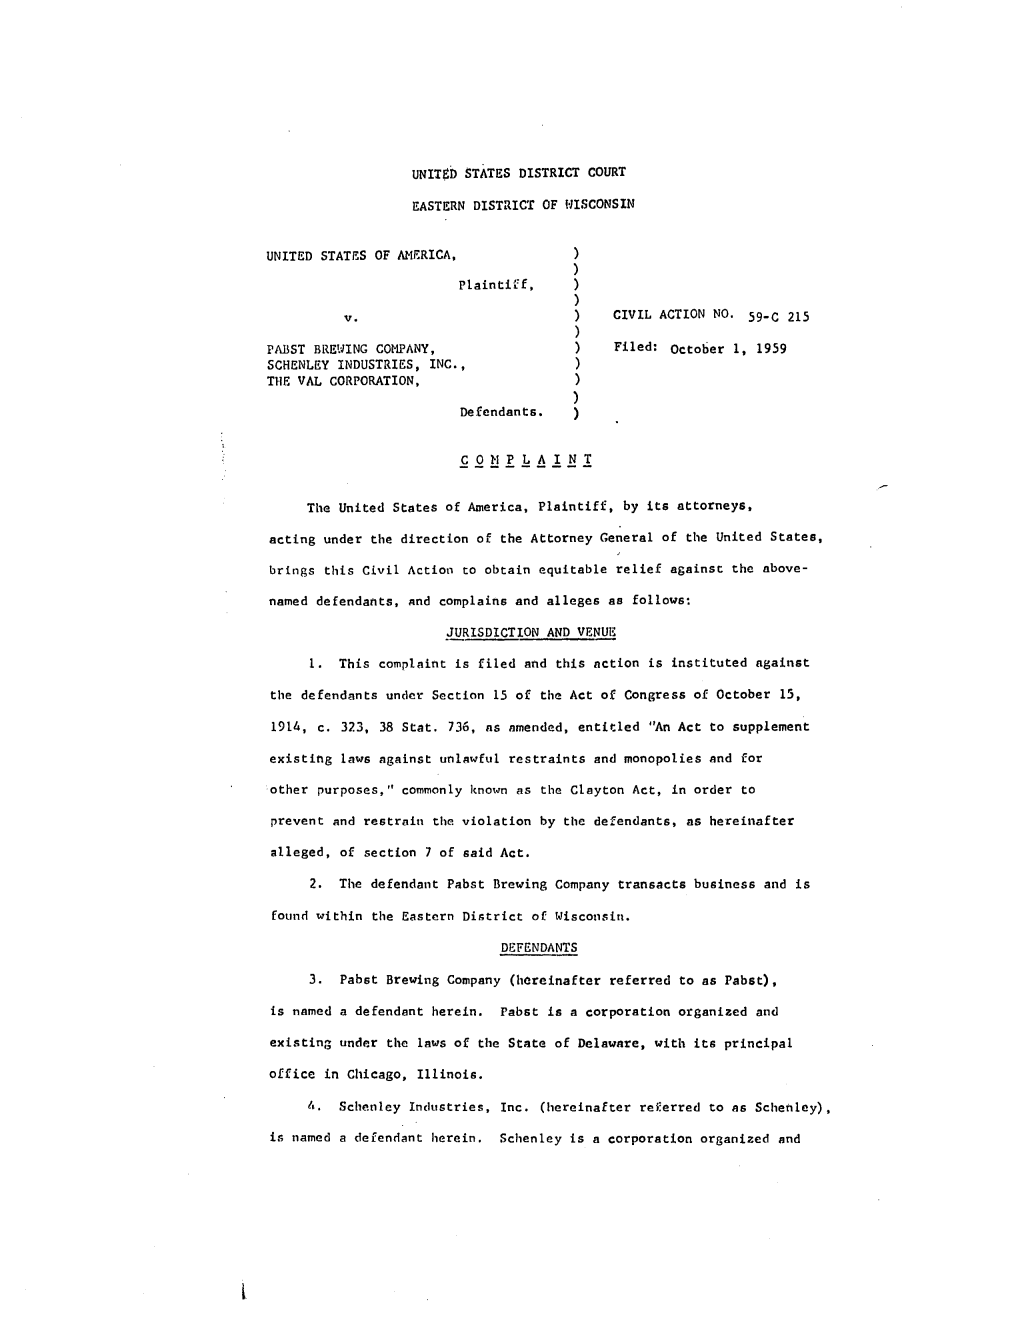 Complaint, United States V. Pabst Brewing Co